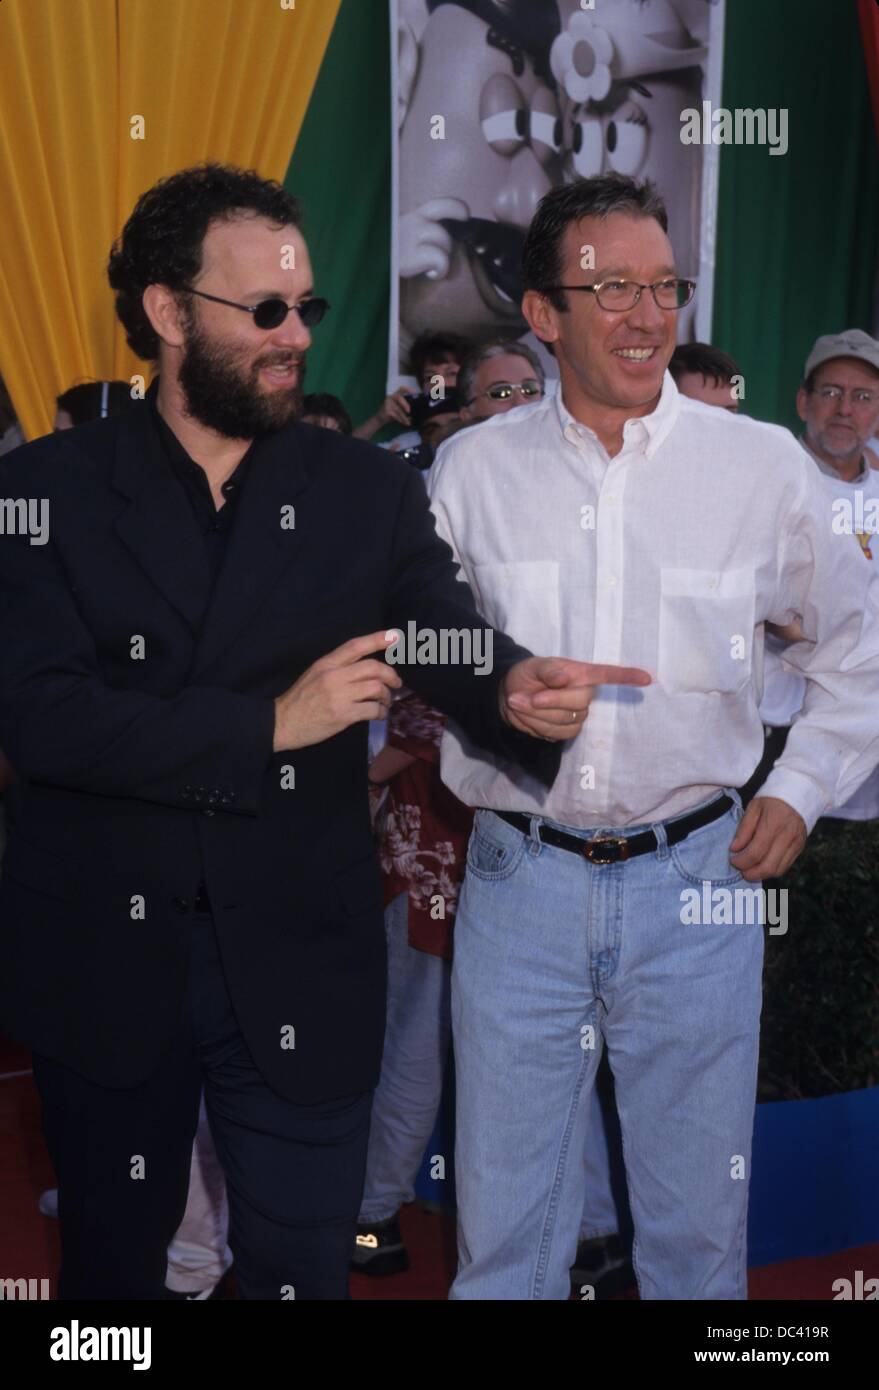 TOM HANKS with Tim Allen.Toy story 2 premiere at El Capitan theater in Hollywood , Ca. 1999.k17172lr.(Credit Image: © Lisa Rose/Globe Photos/ZUMAPRESS.com) Stock Photo